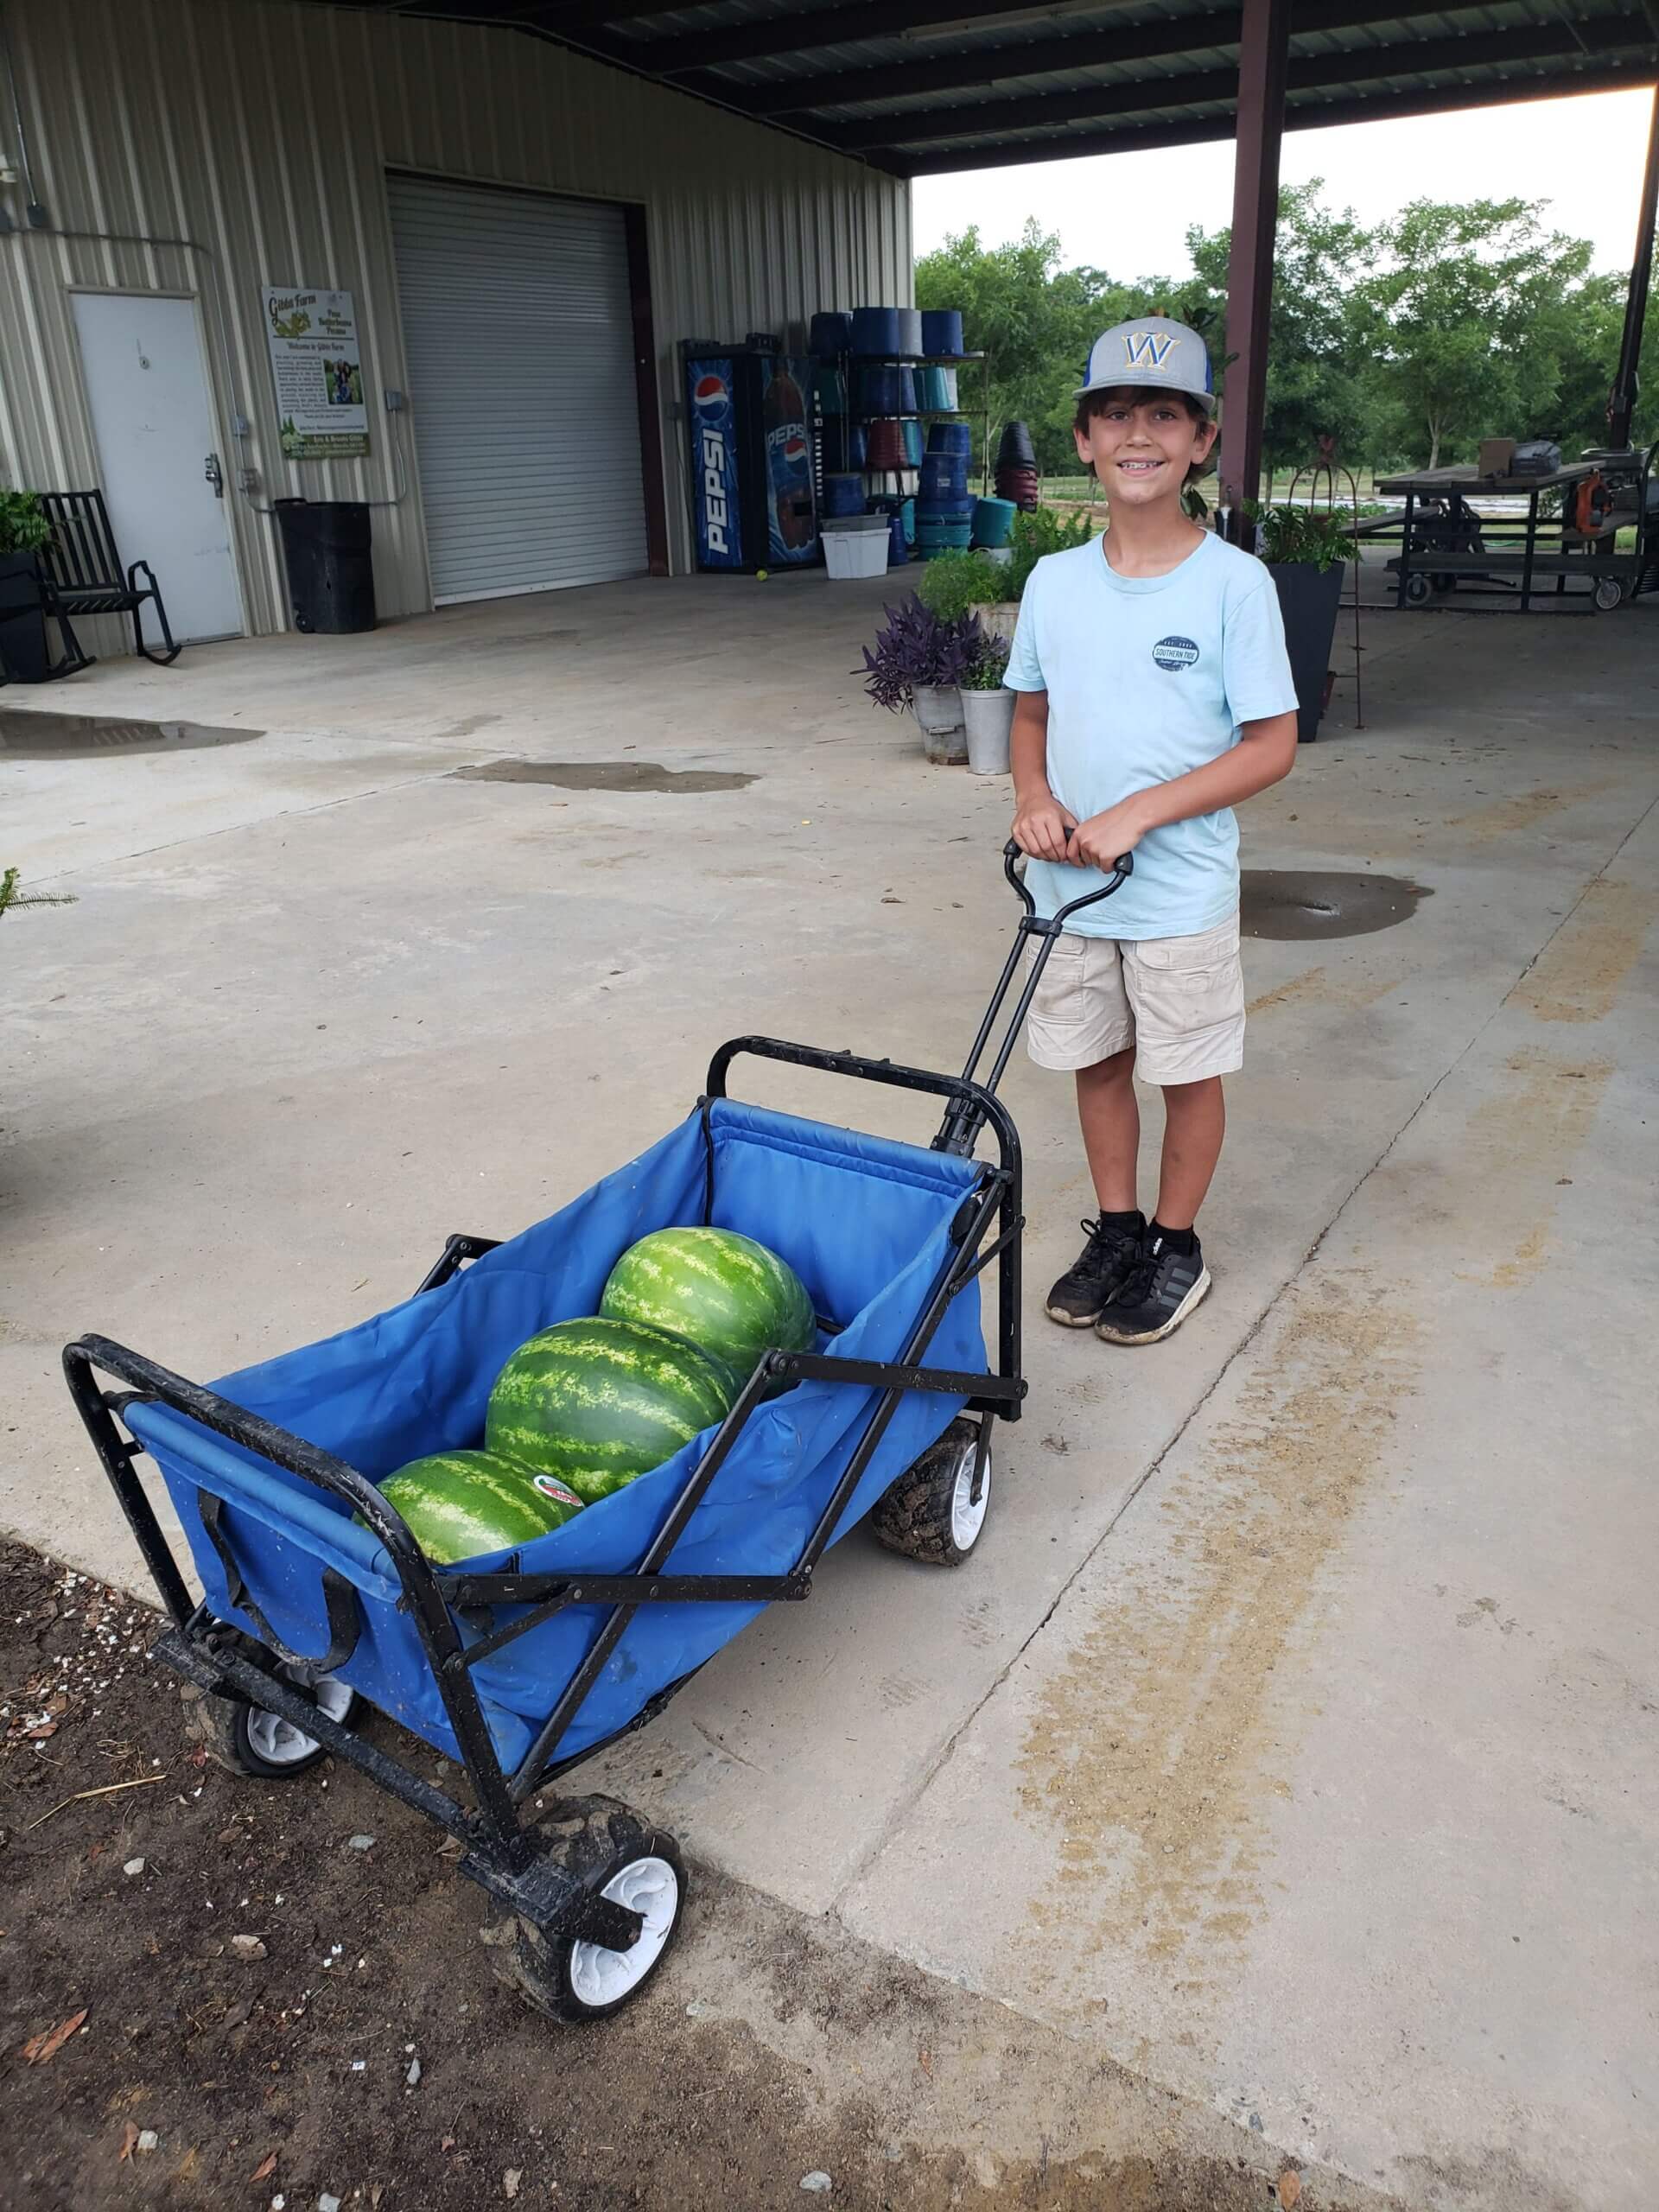 Cotton Gibbs and three large watermelons in his wagon.